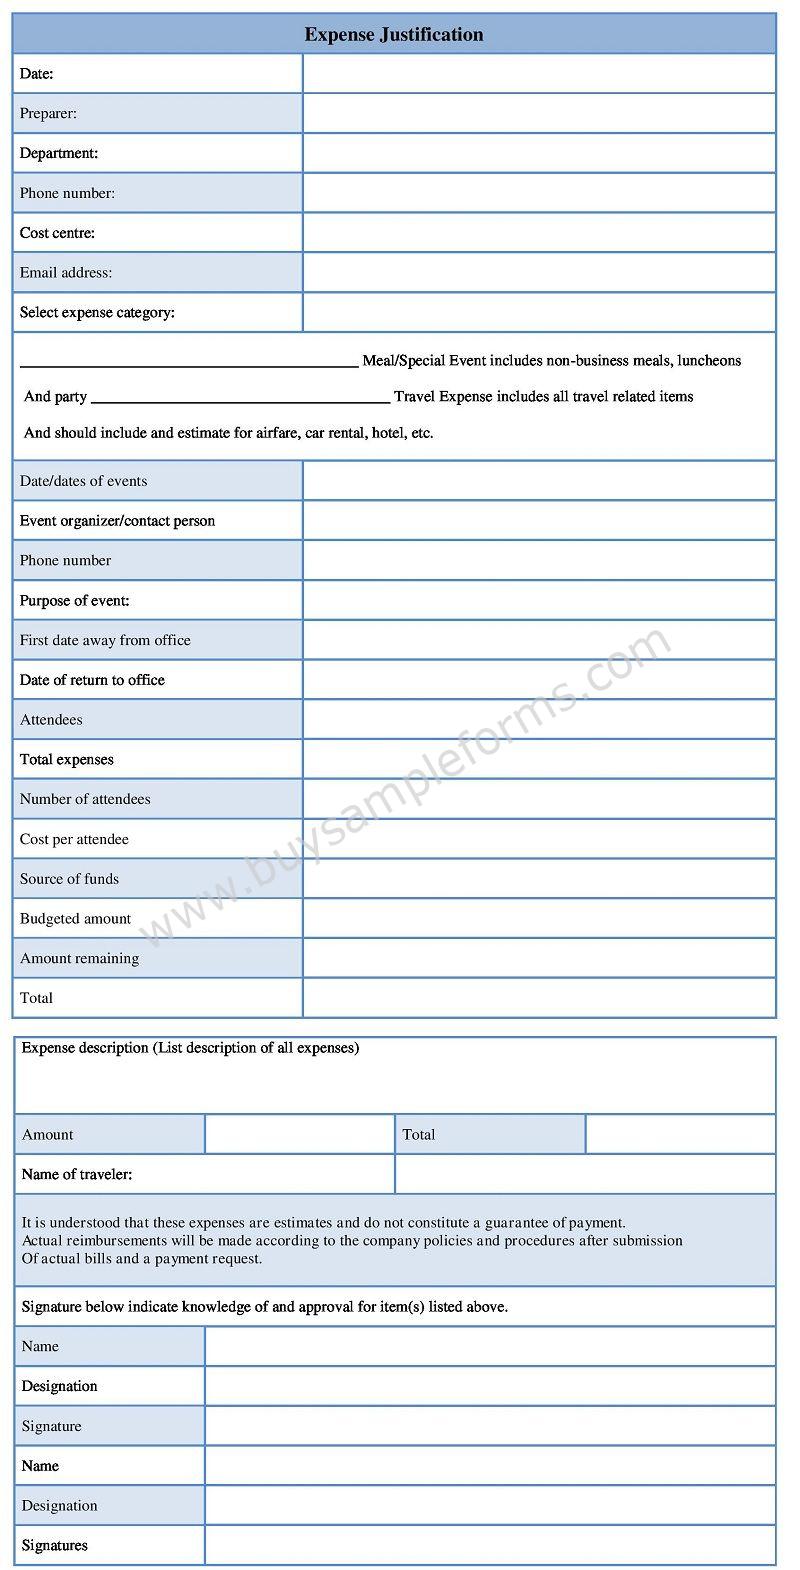 Expense Justification Form Template